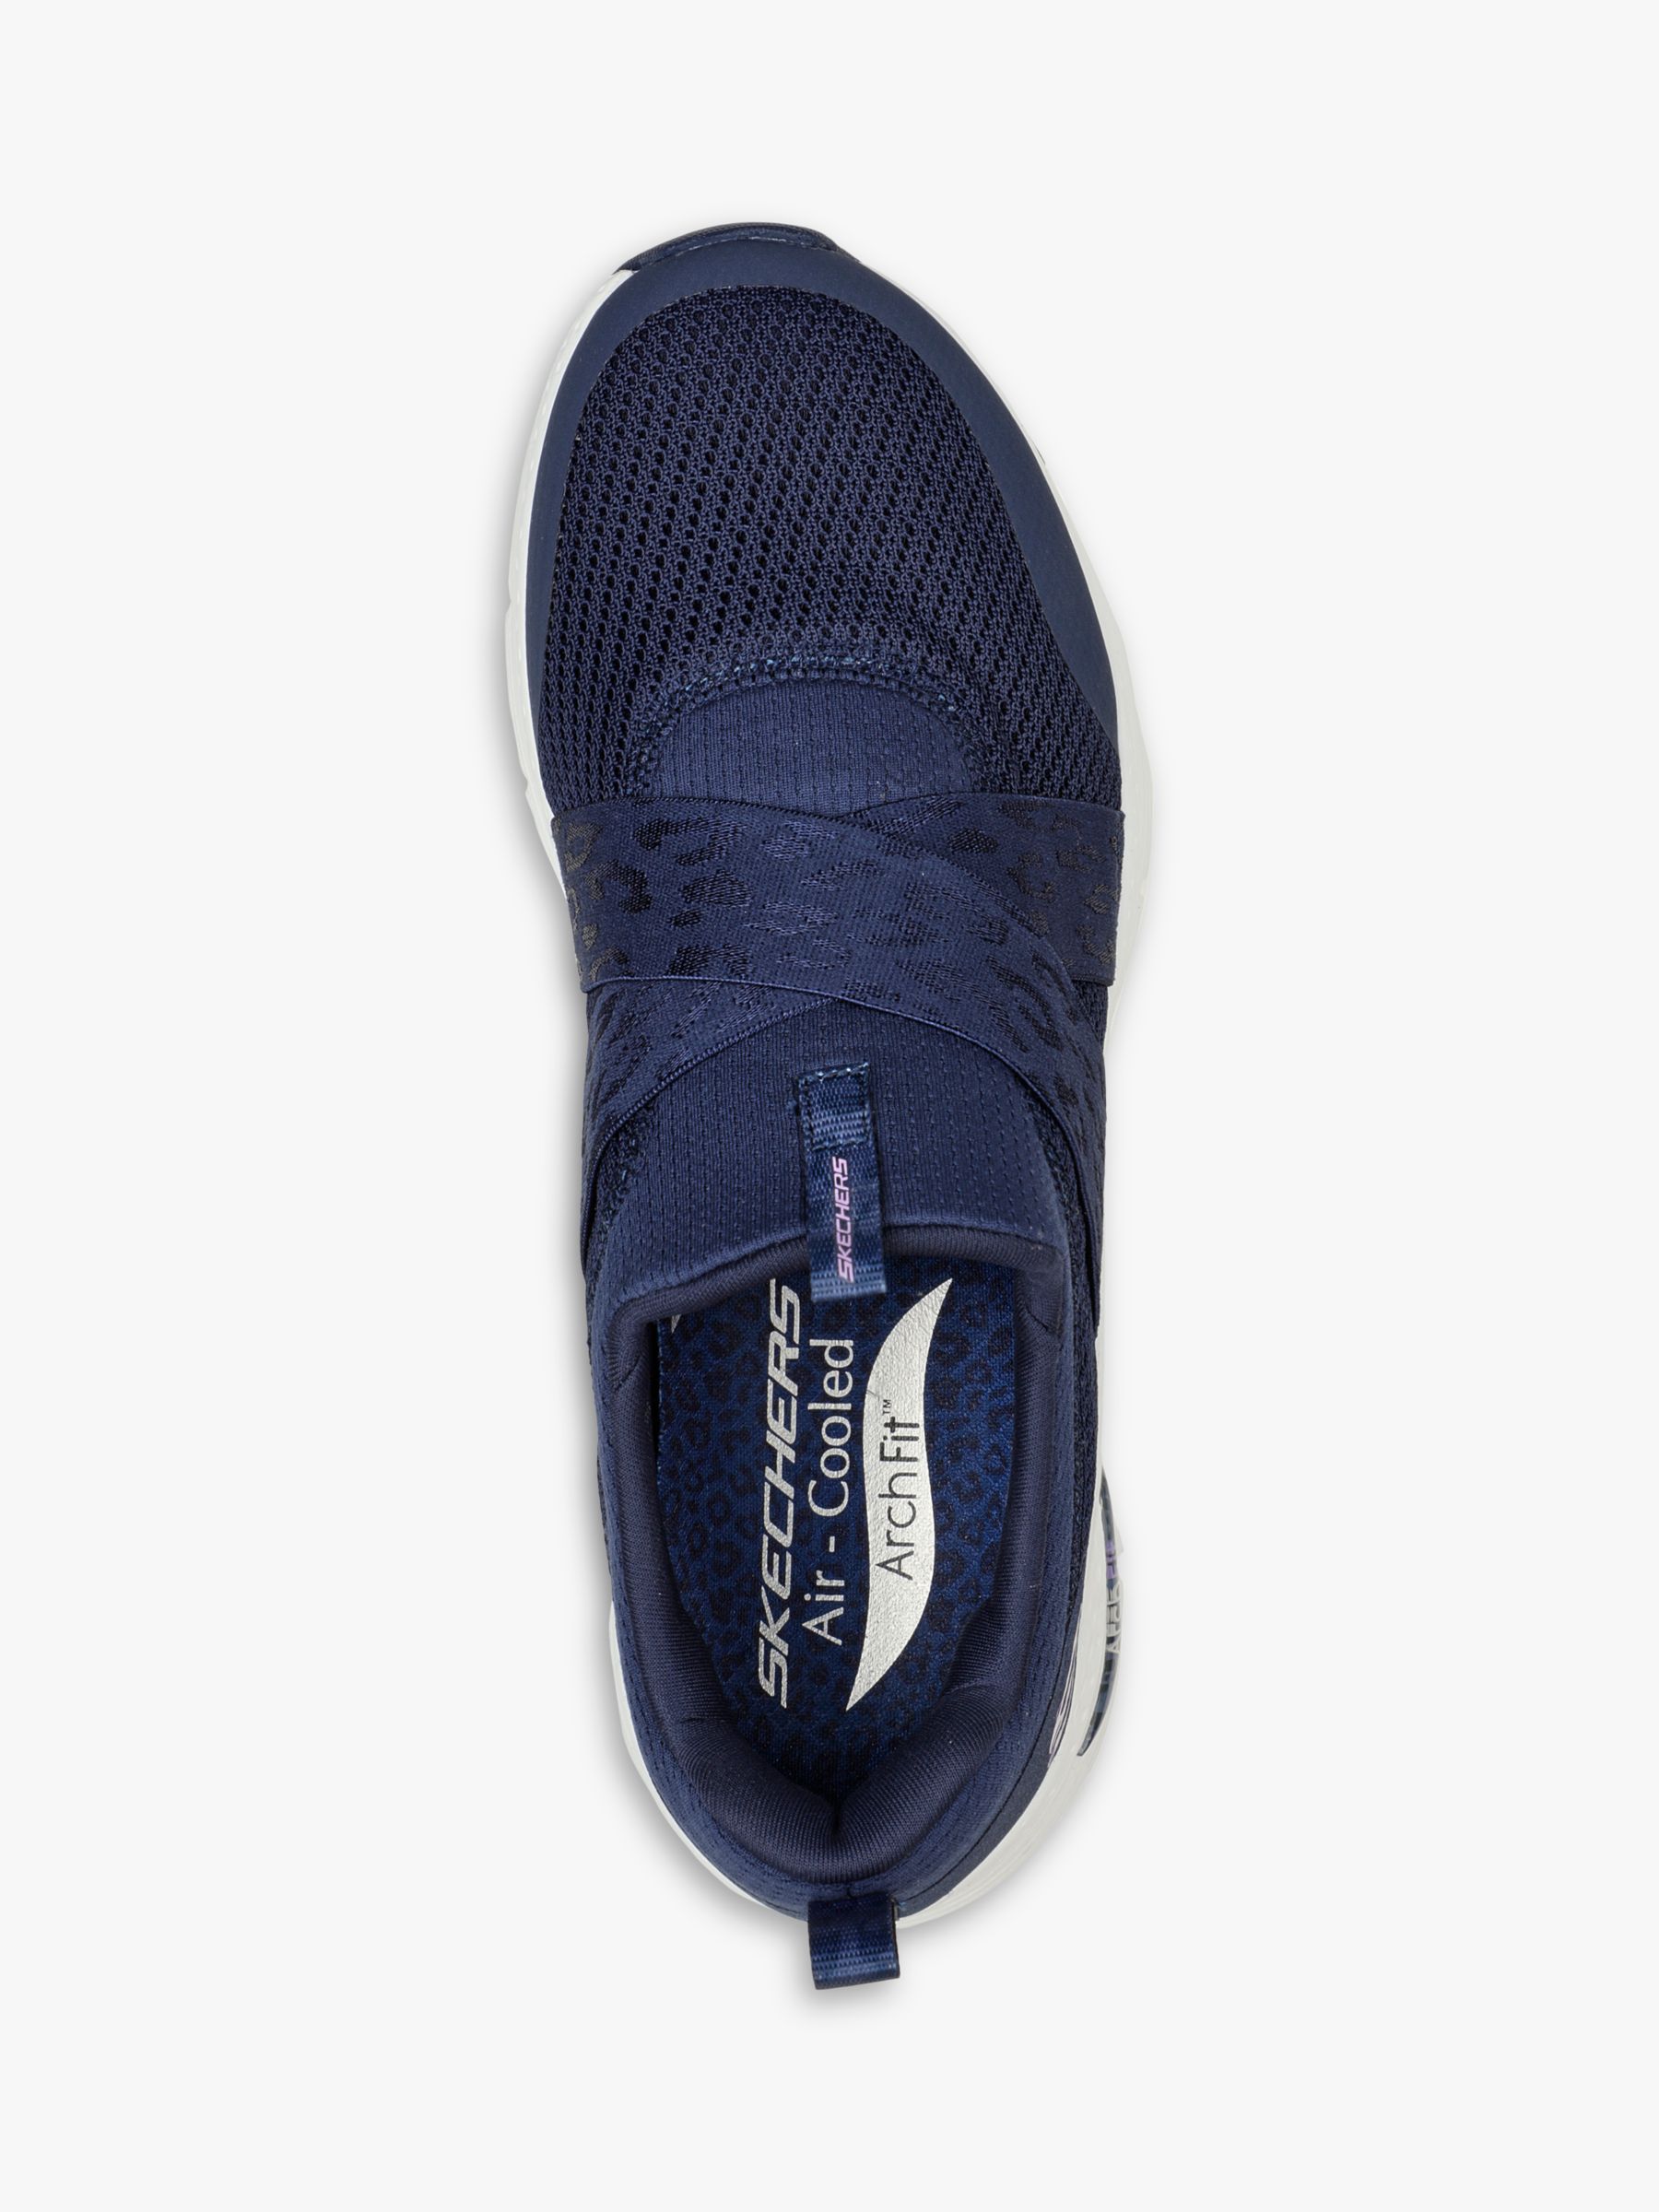 Skechers Arch Fit Modern Rhythm Slip On Trainers, Navy at John Lewis ...